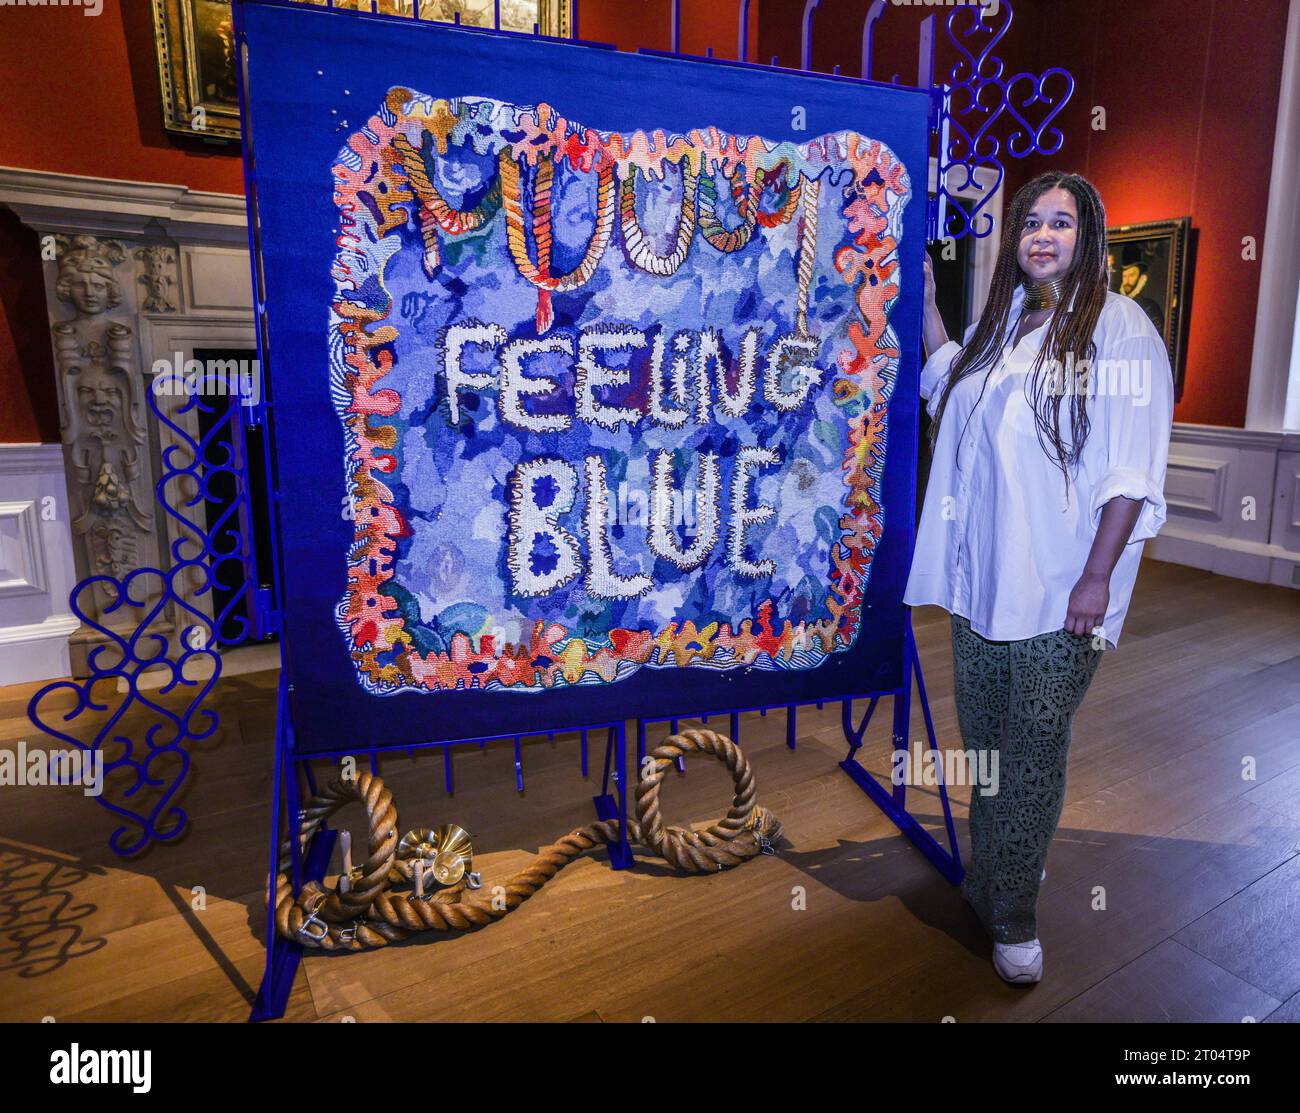 London, UK. 04th Oct, 2023. Royal Museums Greenwich unveiled a major new commission opening at the Queen's House The piece, by artist Alberta Whittle Pictured is called ‘Feeling Blue' and was woven in Edinburgh by Dovecot. Is displayed on powder-coated steel gates, designed by Whittle and made at Glasgow Sculpture Studios. Credit: Paul Quezada-Neiman/Alamy Live News Stock Photo